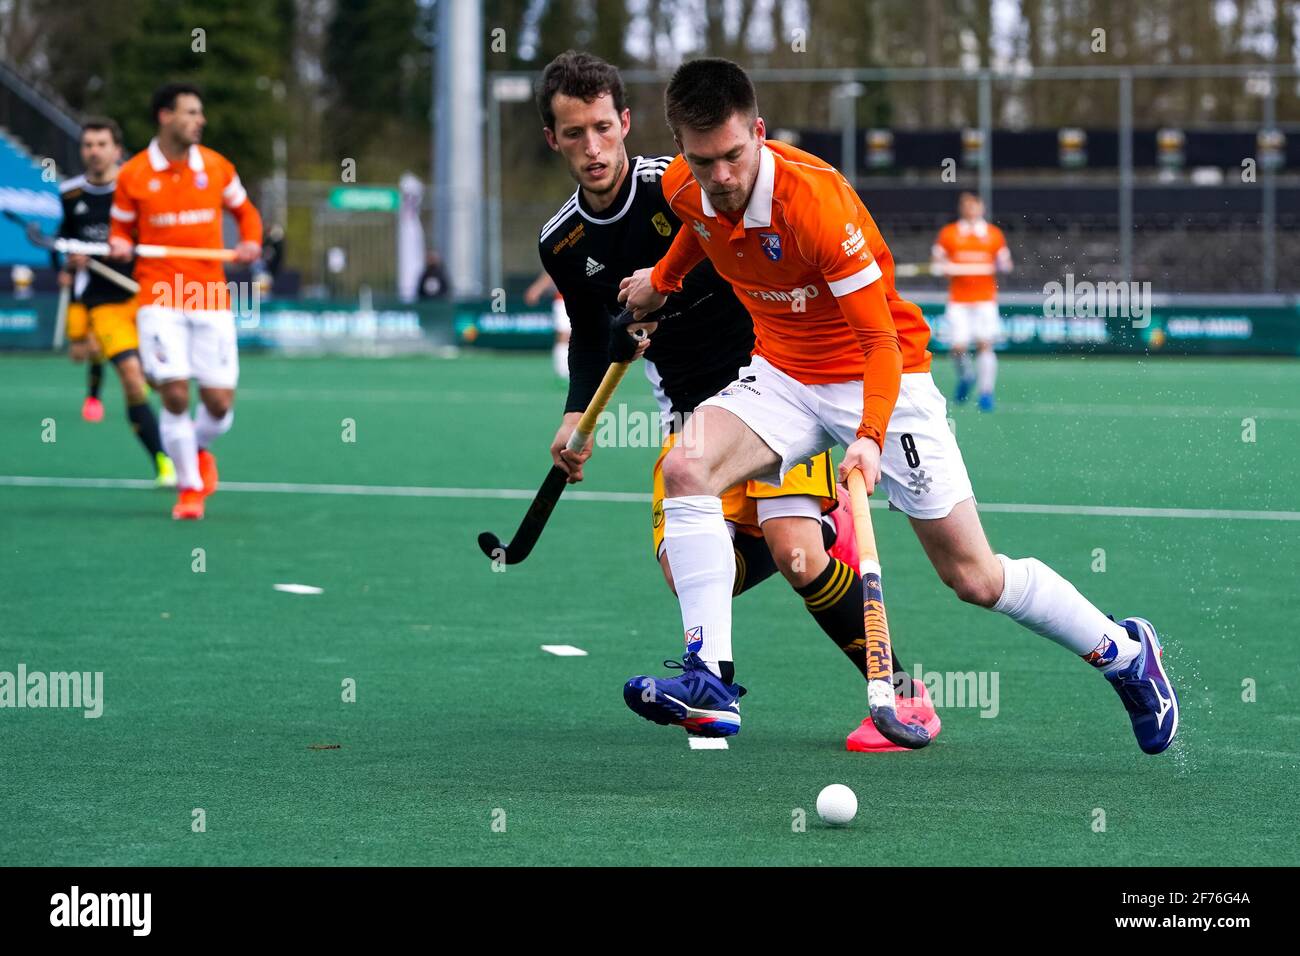 AMSTELVEEN, NETHERLANDS - APRIL 5: Ignasi Torras of Atletic Terrassa HC and Thierry Brinkman of Bloemendaal during the Euro Hockey League Final match between Atletic Terrassa HC and Bloemendaal at Wagener Stadion on April 5, 2021 in Amstelveen, Netherlands (Photo by Andre Weening/Orange Pictures) Stock Photo